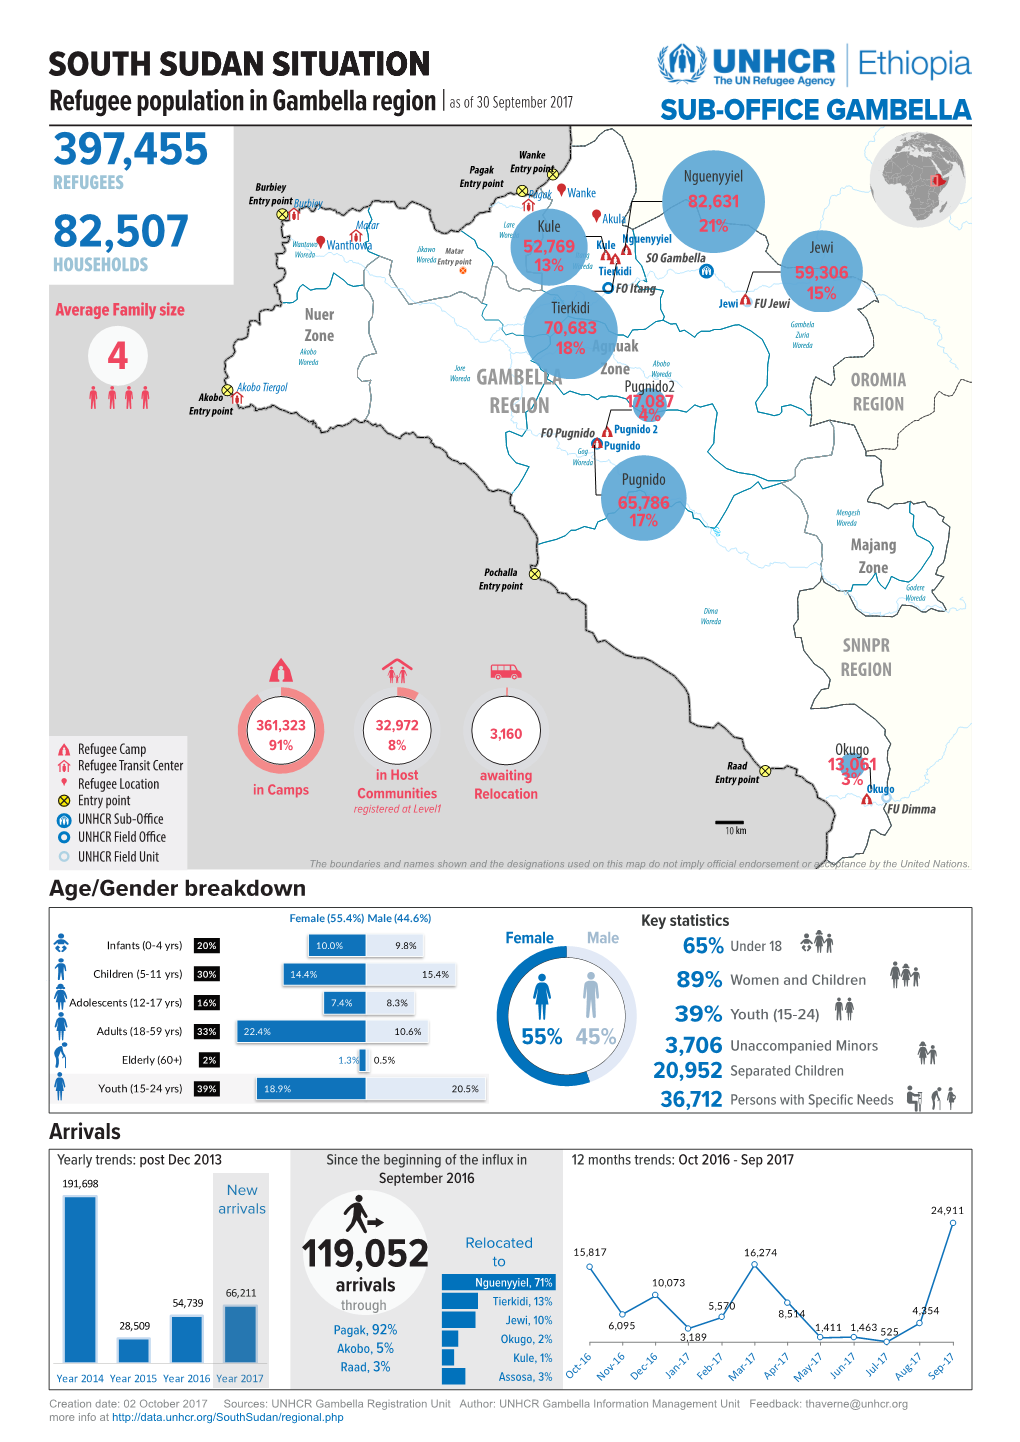 SOUTH SUDAN SITUATION; Refugee Population in Gambella Region; As of 30 September 2017